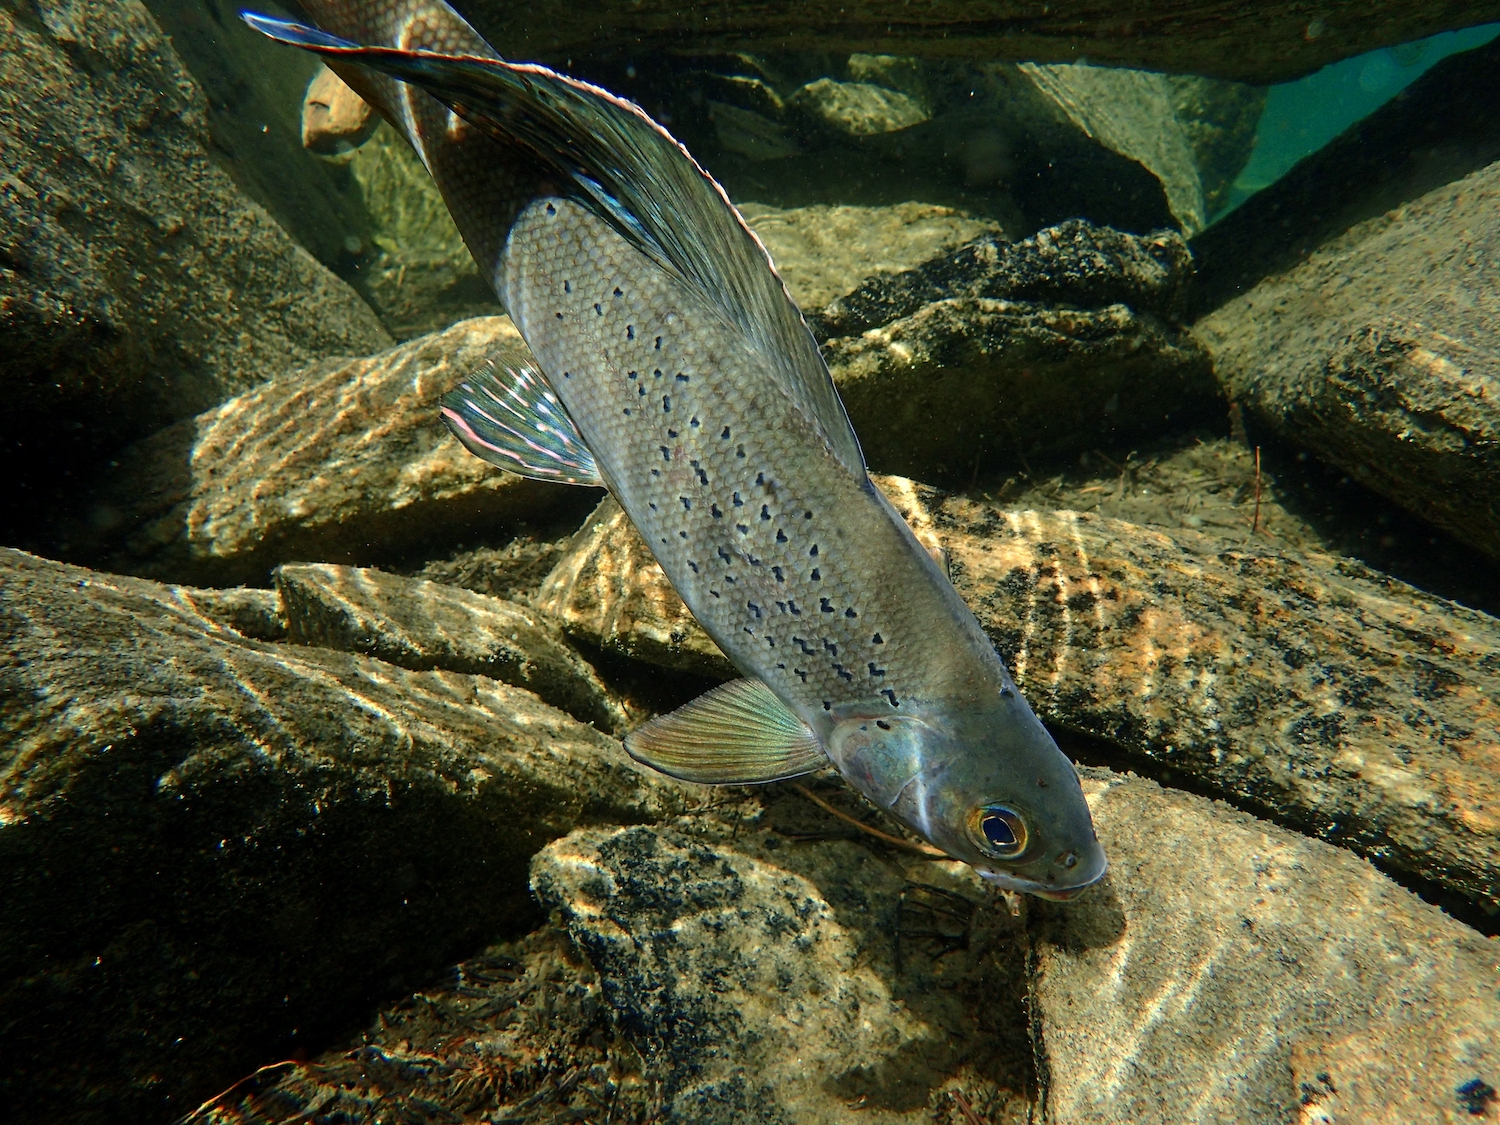 Arctic Grayling swimming in front of rocks